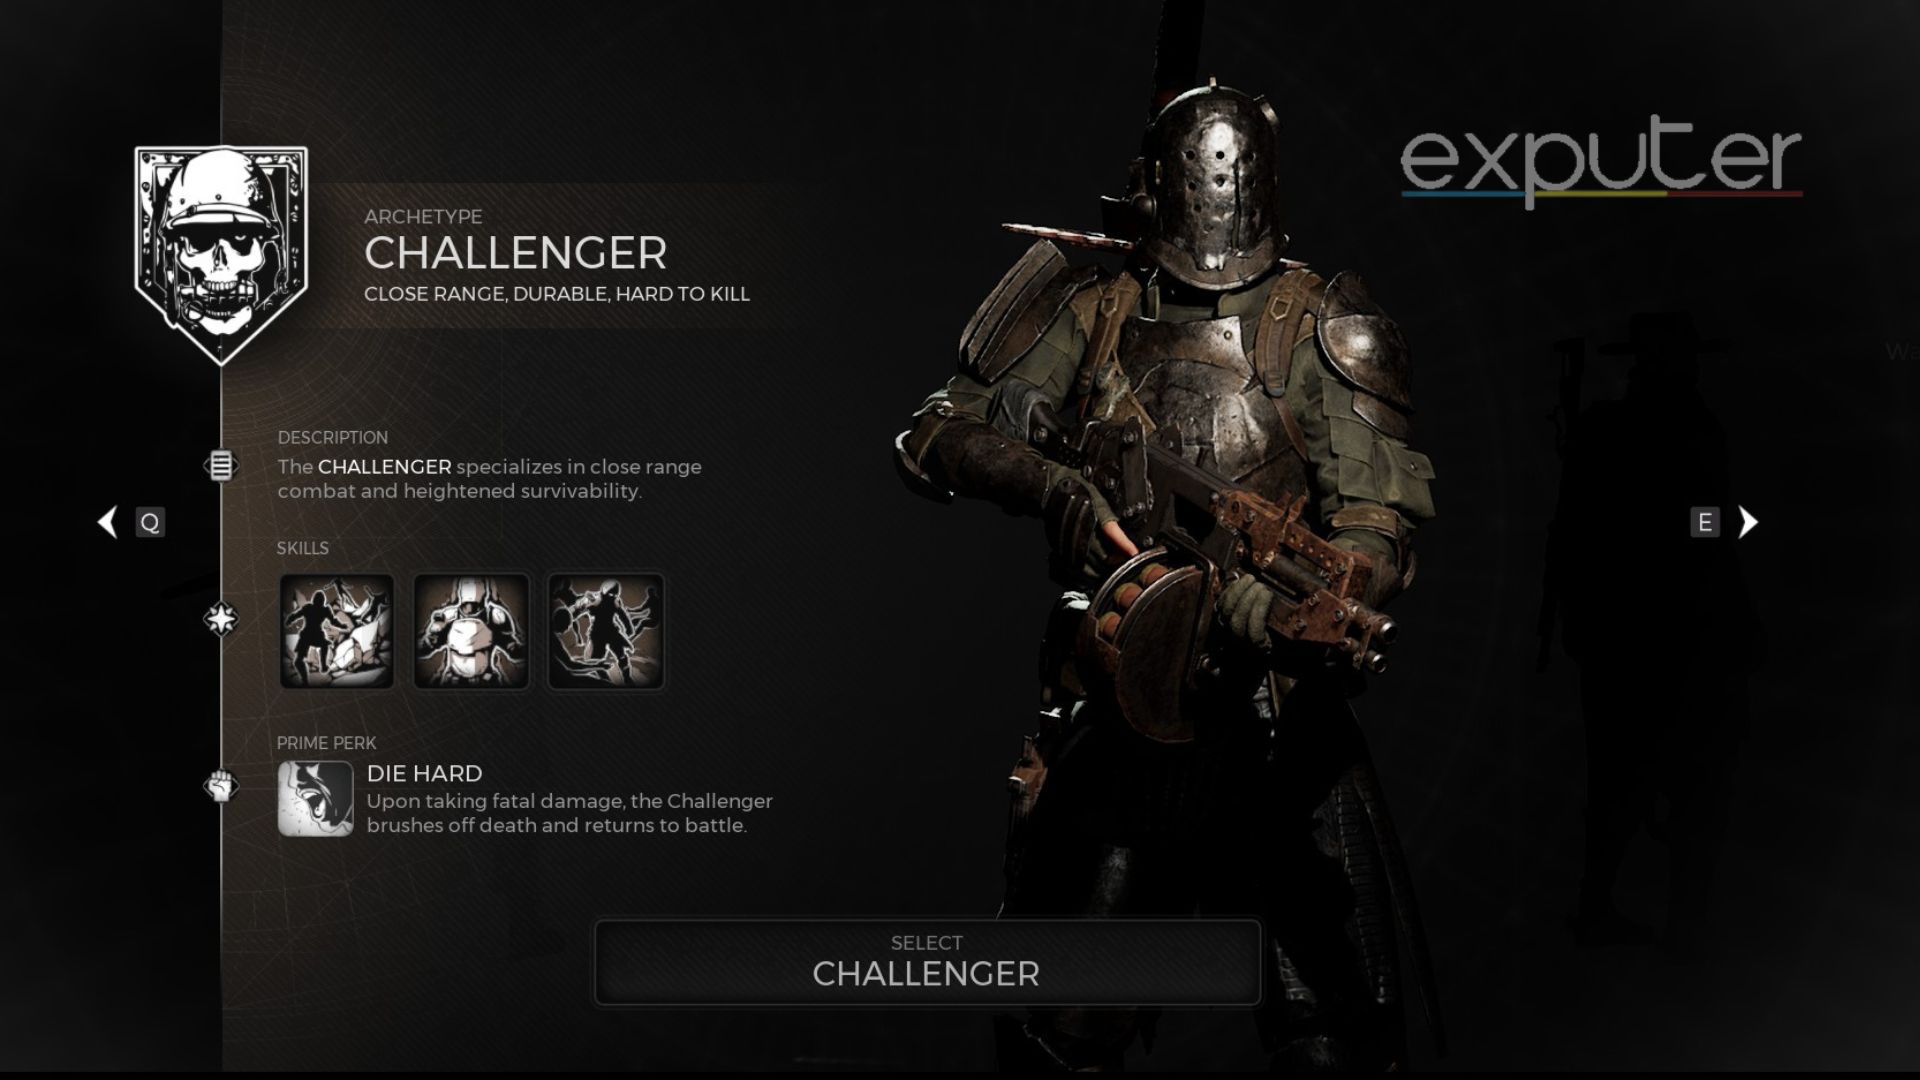 The Challenger Archetype.